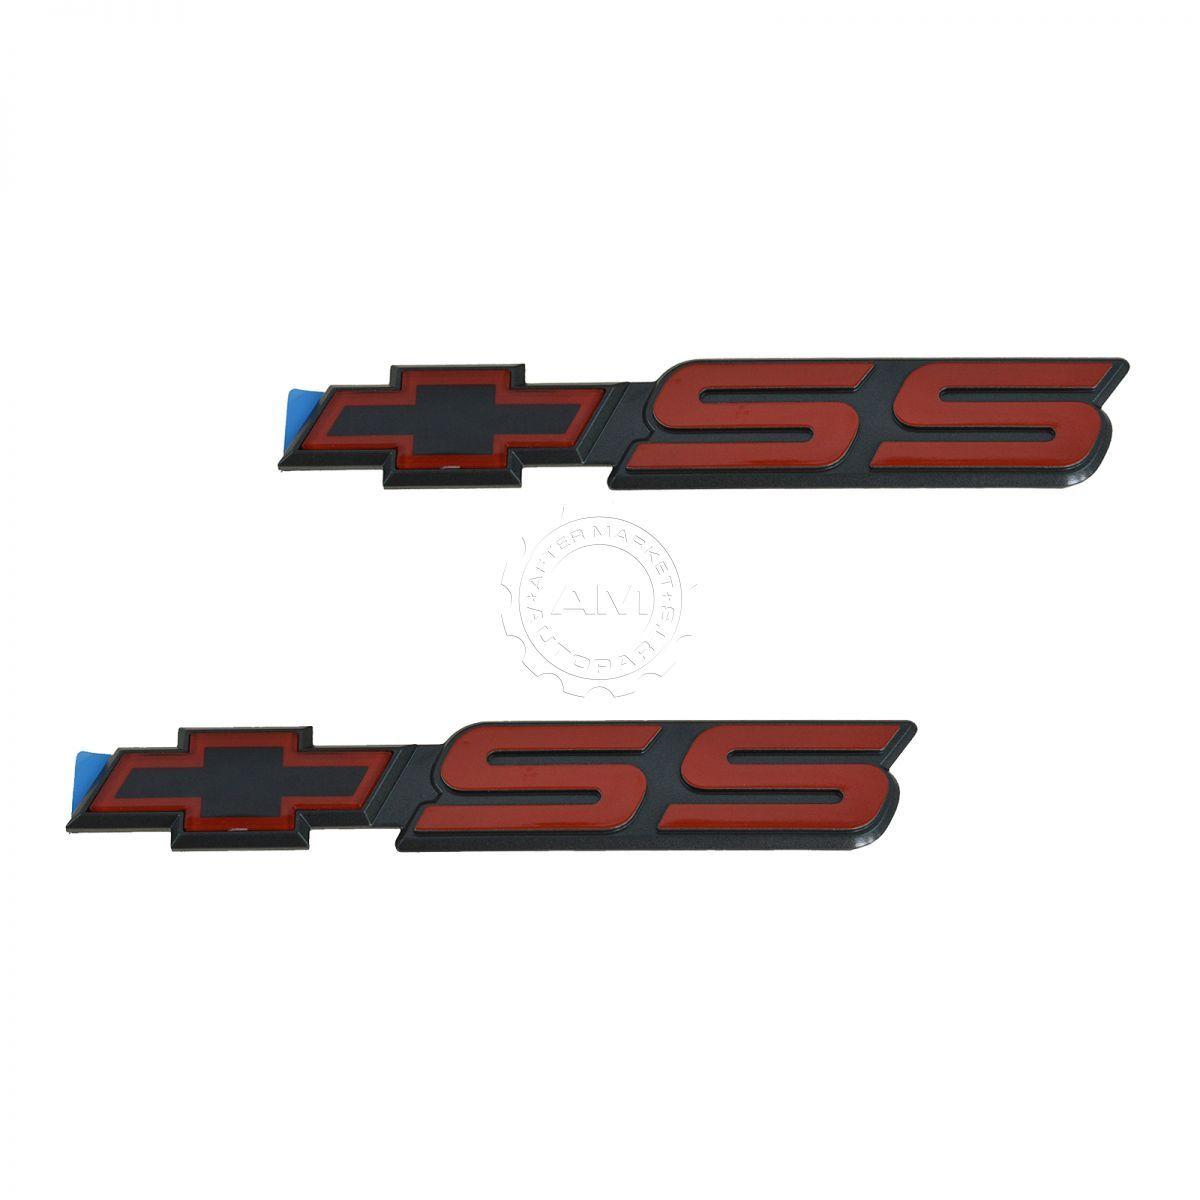 S10 Logo - OEM Emblem Nameplate Red SS Bow Tie Pair Set for 94-04 Chevy S10 ...